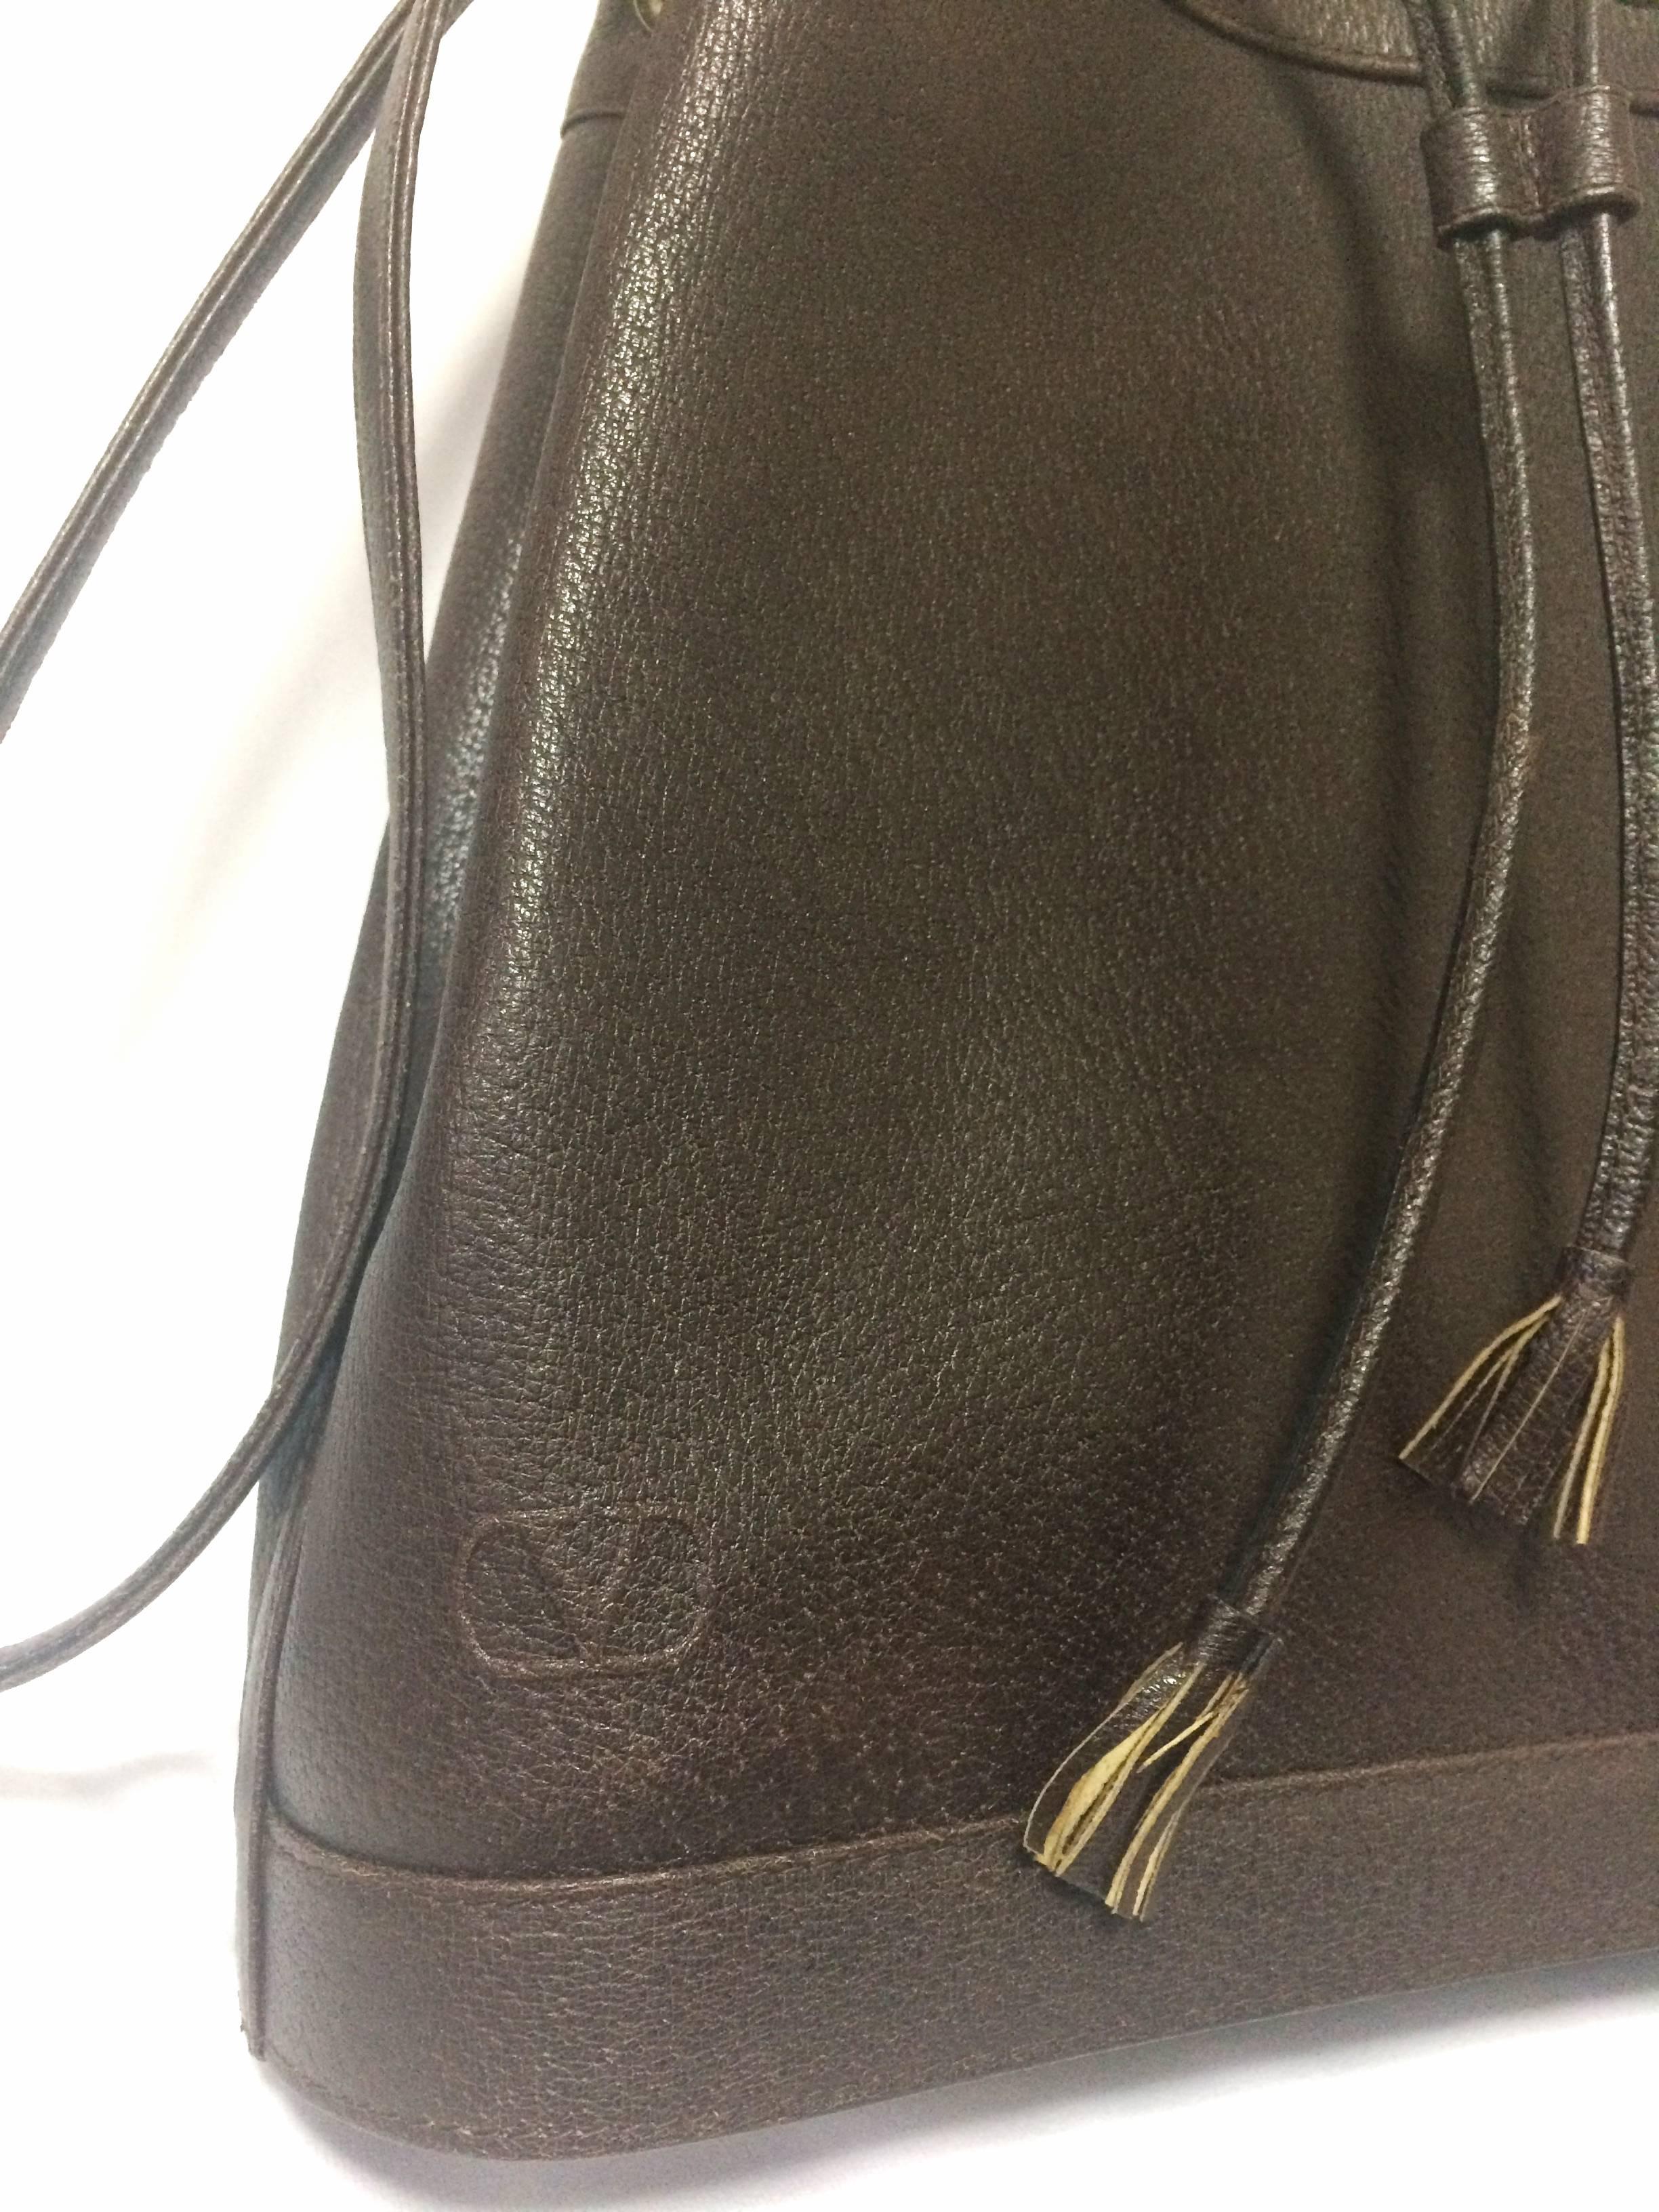 1990s. Vintage Valentino Garavani dark brown leather hobo bucket shoulder bag with embossed V logo. Unisex use.

Introducing another great conditioned vintage masterpiece from Valentino Garavani back in the early 90's collection.

Featuring its